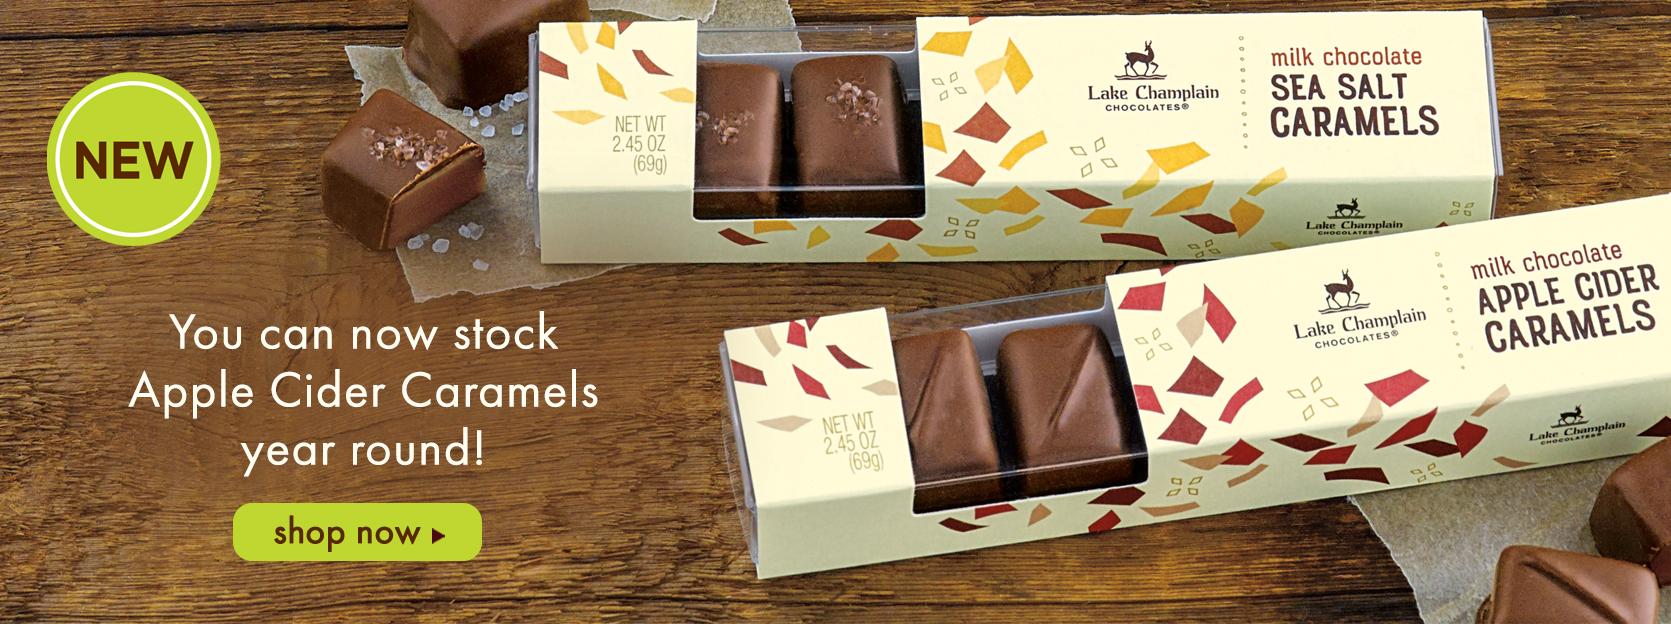 Apple Cider Caramels available year round!